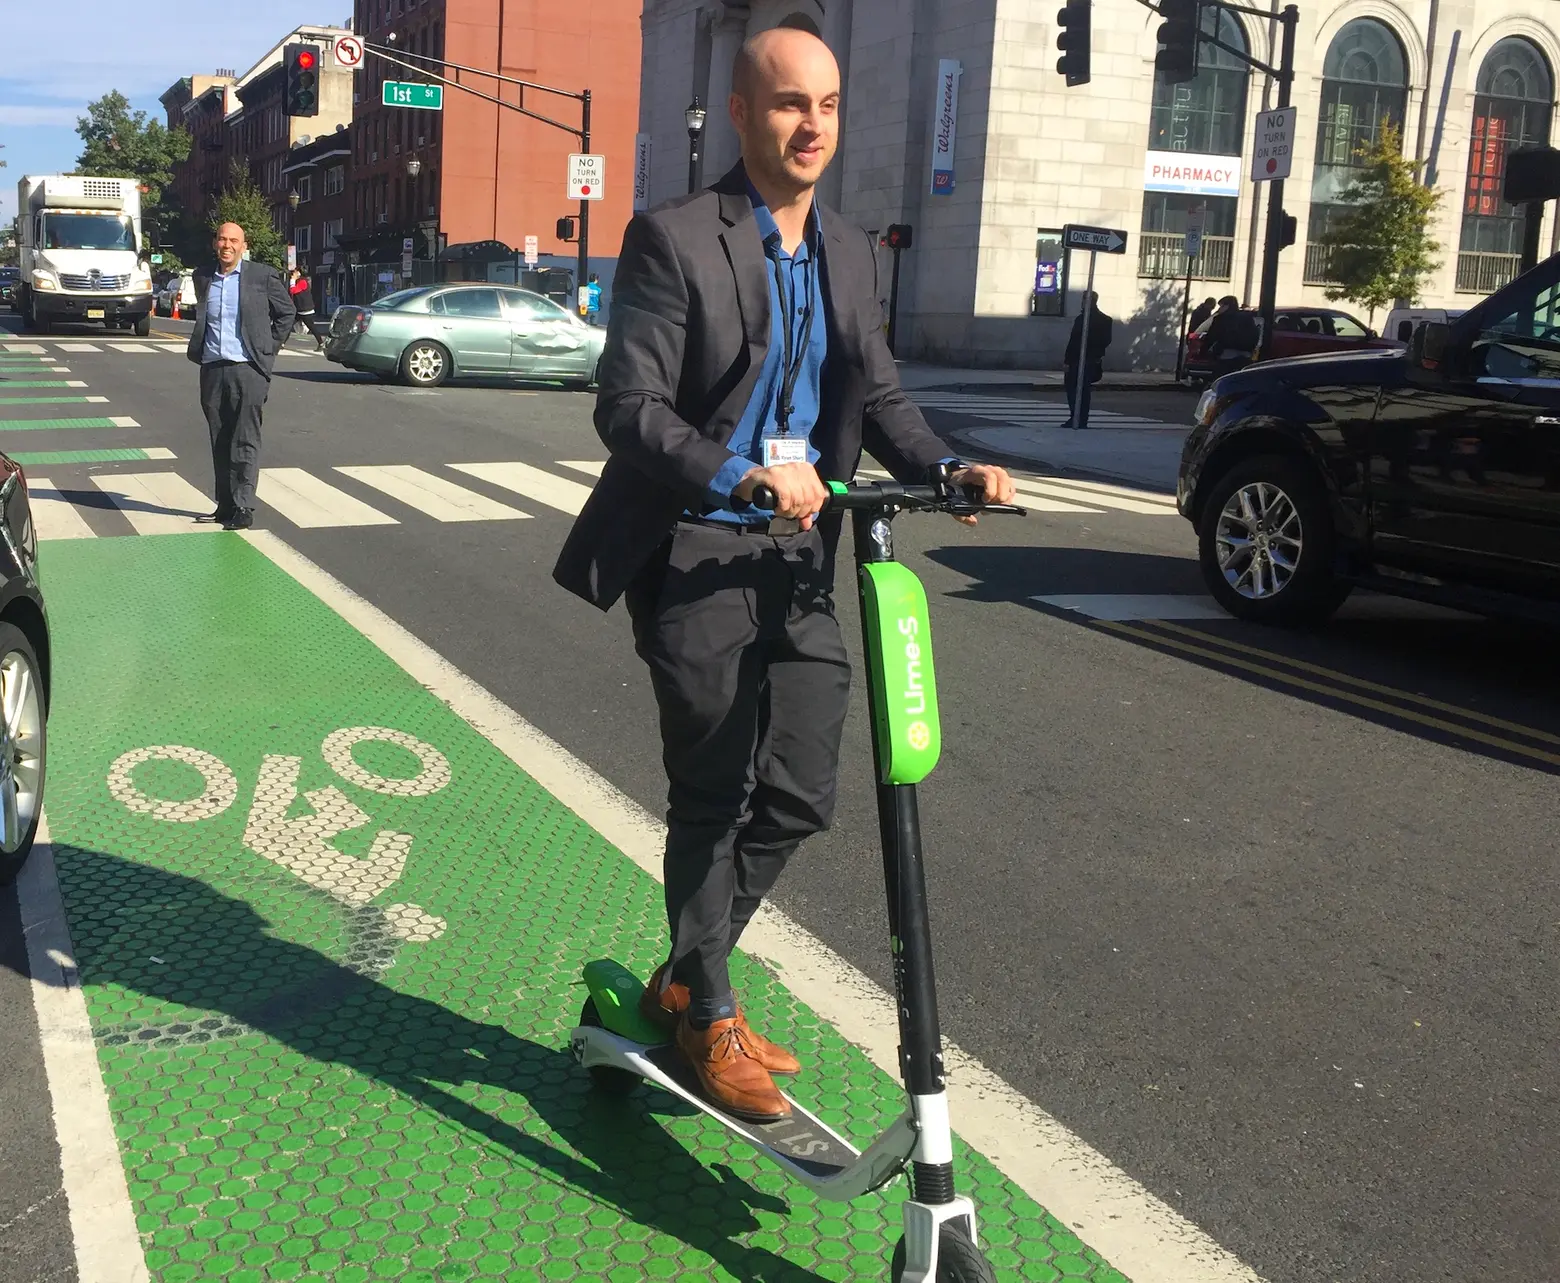 Hoboken to become first city in NJ to launch electric scooter rental program